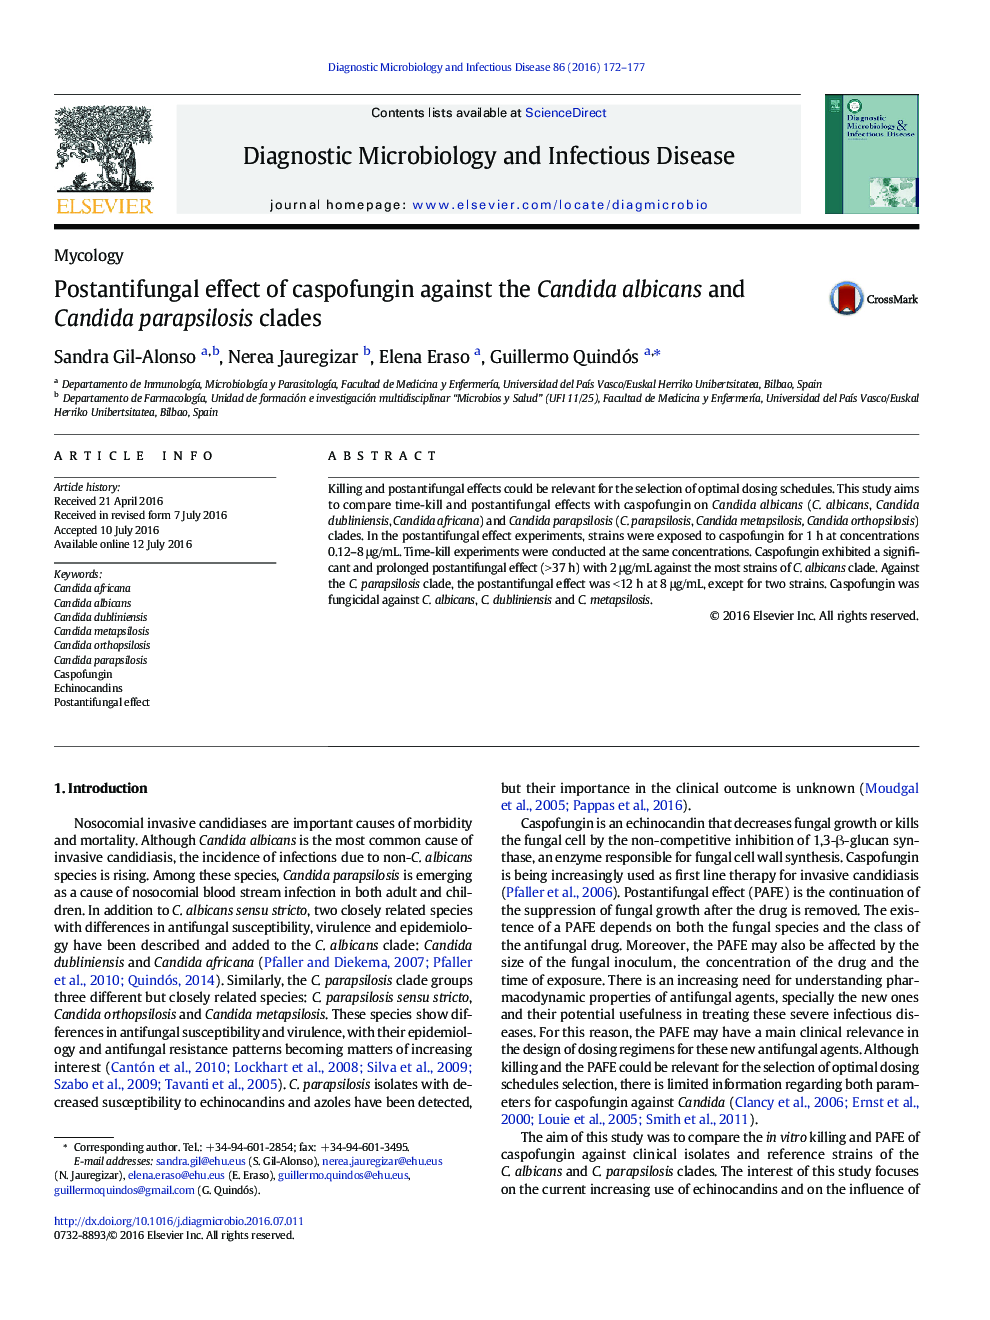 Postantifungal effect of caspofungin against the Candida albicans and Candida parapsilosis clades